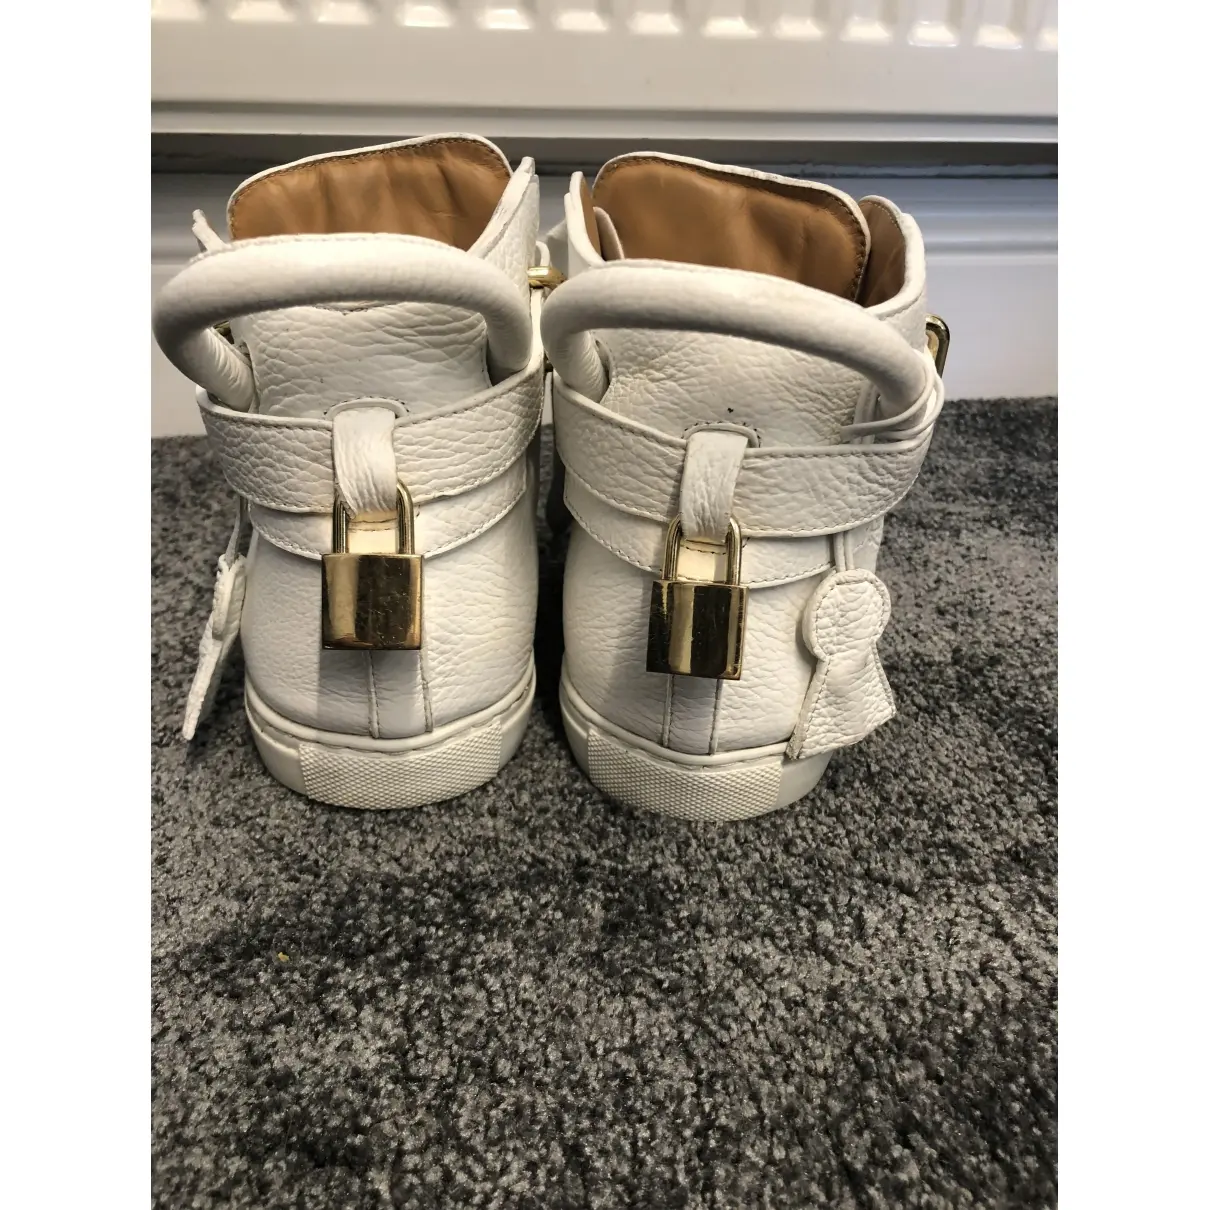 Buy Buscemi Leather high trainers online